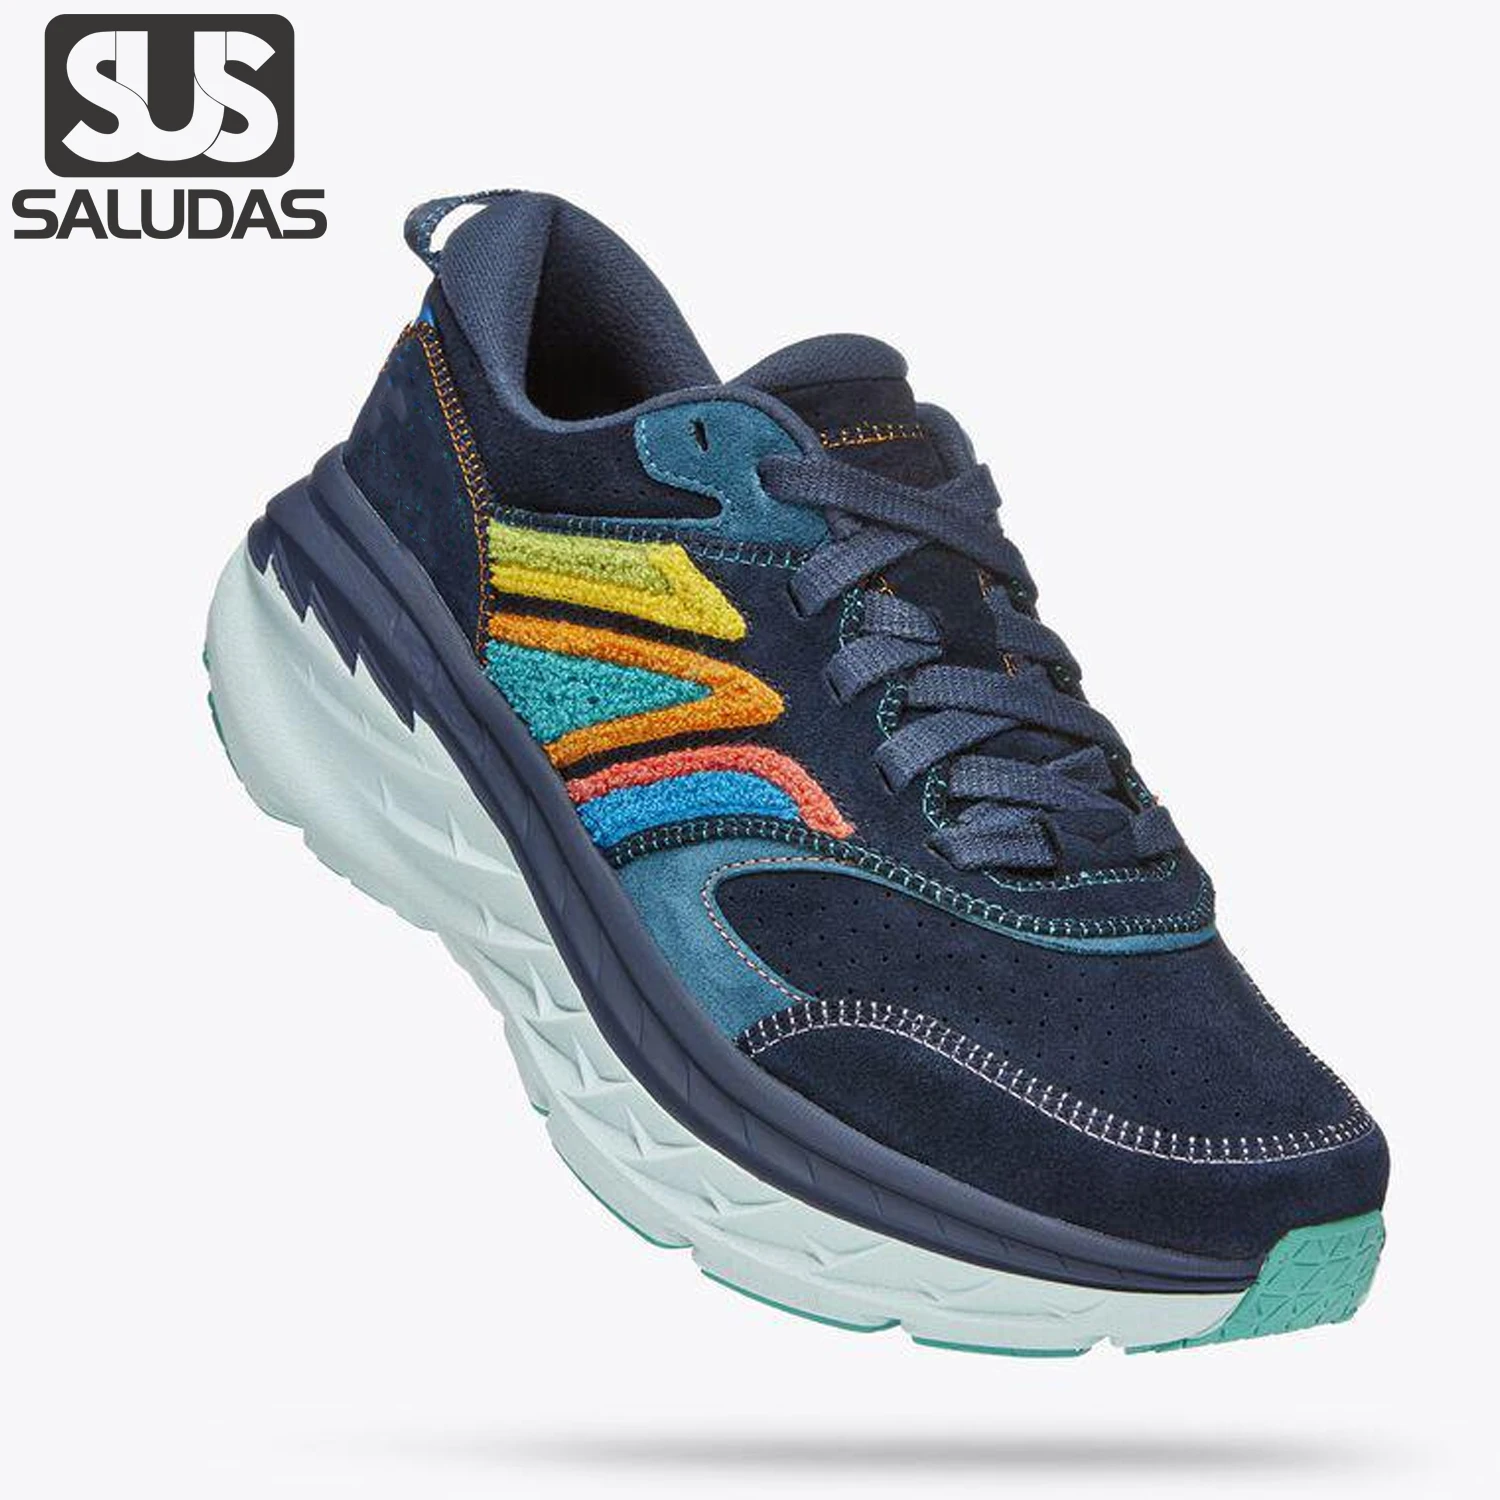 

SALUDAS Bondi L Running Shoes for Women Leather Luxury Casual Sports Shoes Thick-Soled Cushioning Outdoor Jogging Sneakers